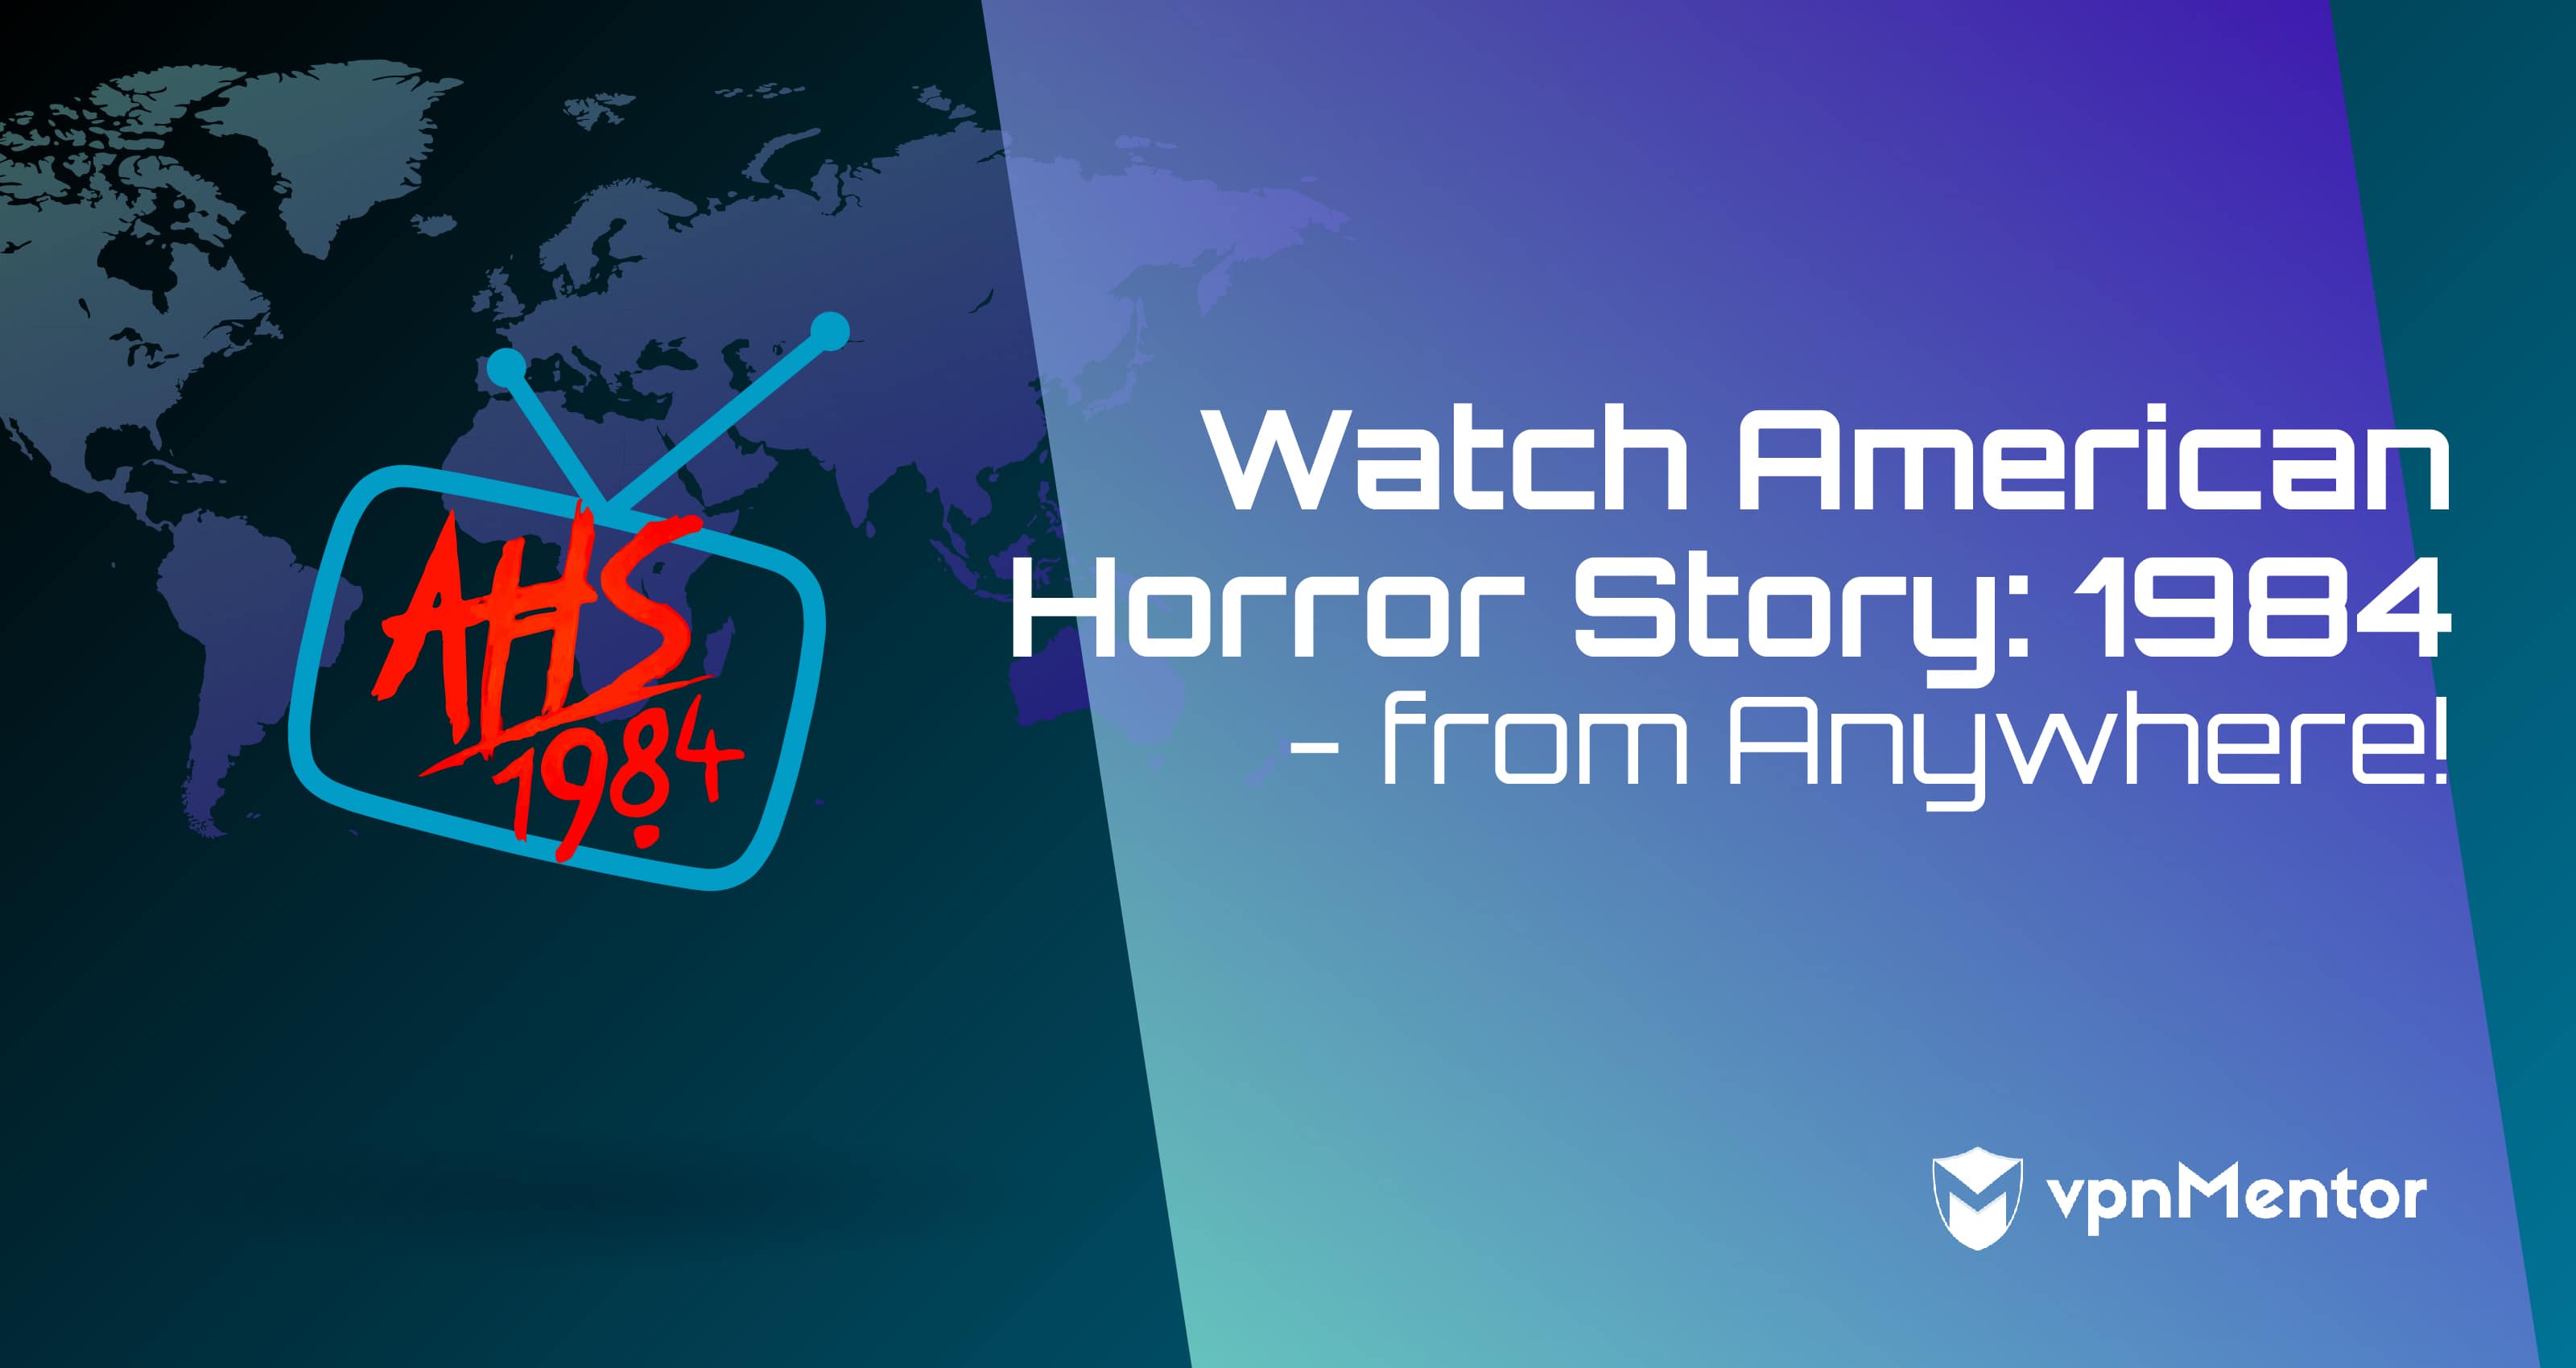 Watch American Horror Story 1984 from Anywhere in 2020!